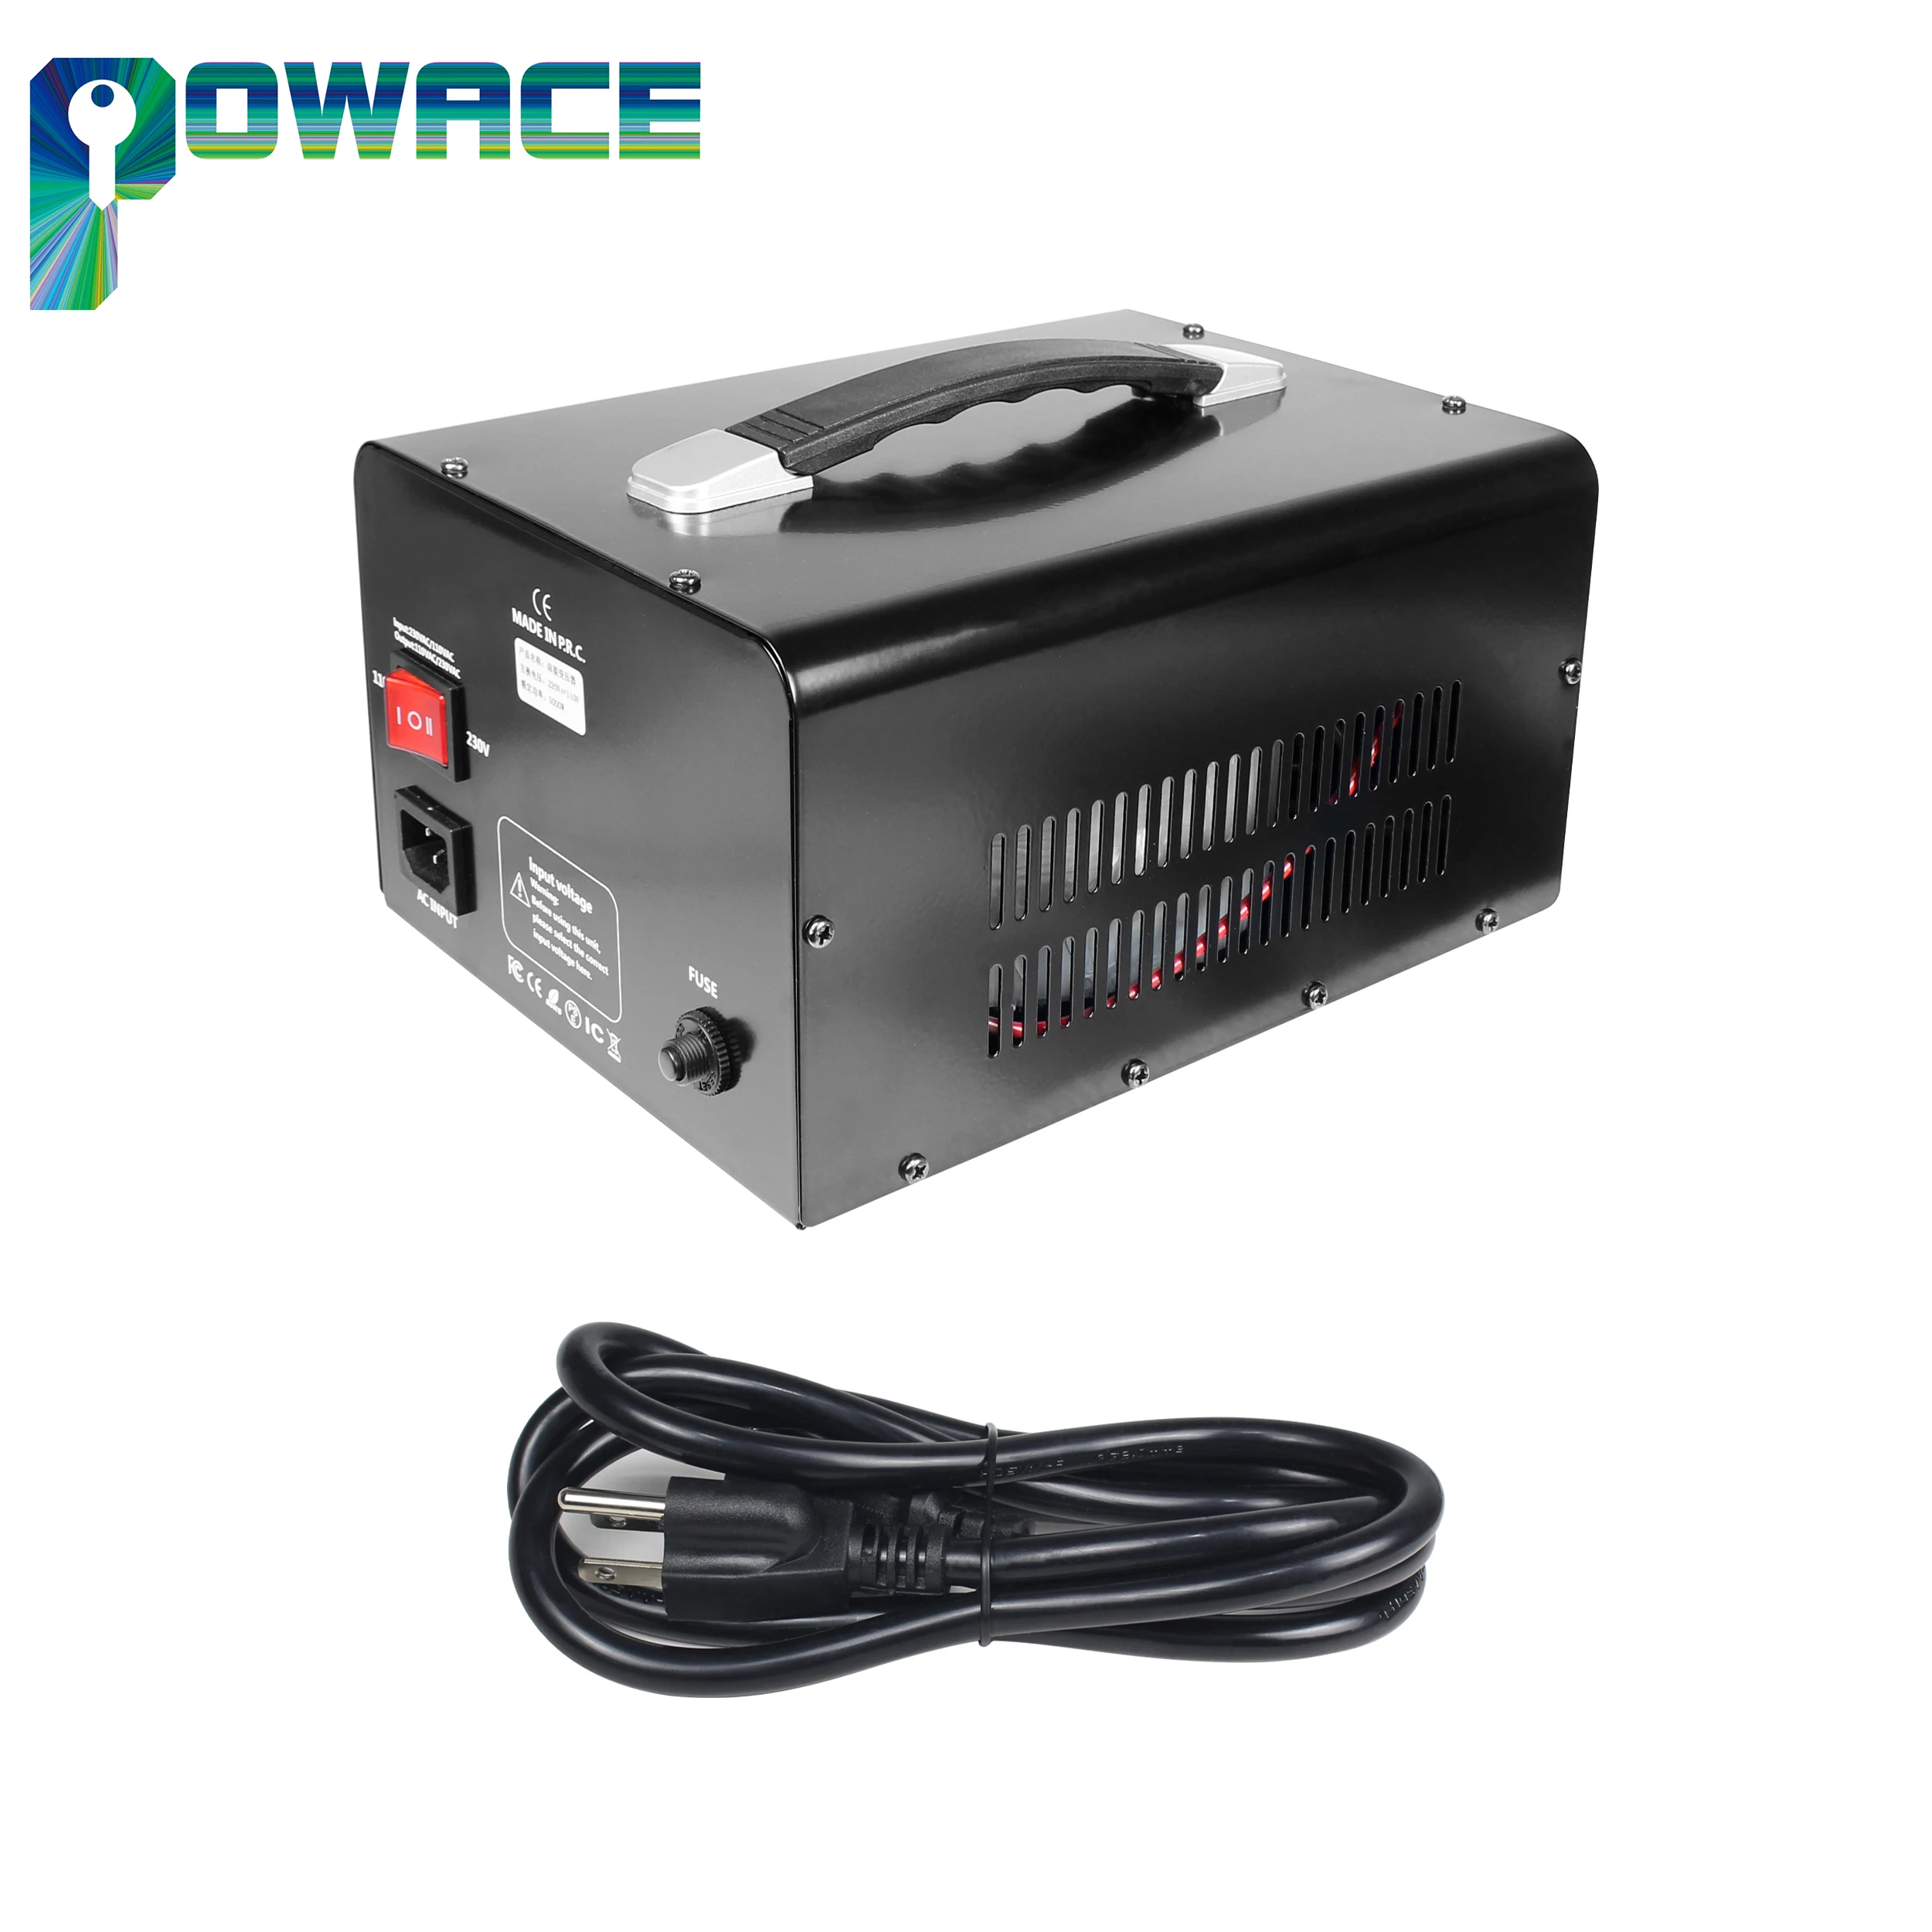 

3000W 5000W Bidirectional Power Supply Voltage Transformer Changer 110V To 220V Or 220V to 110V With Circuit Breaker Protection